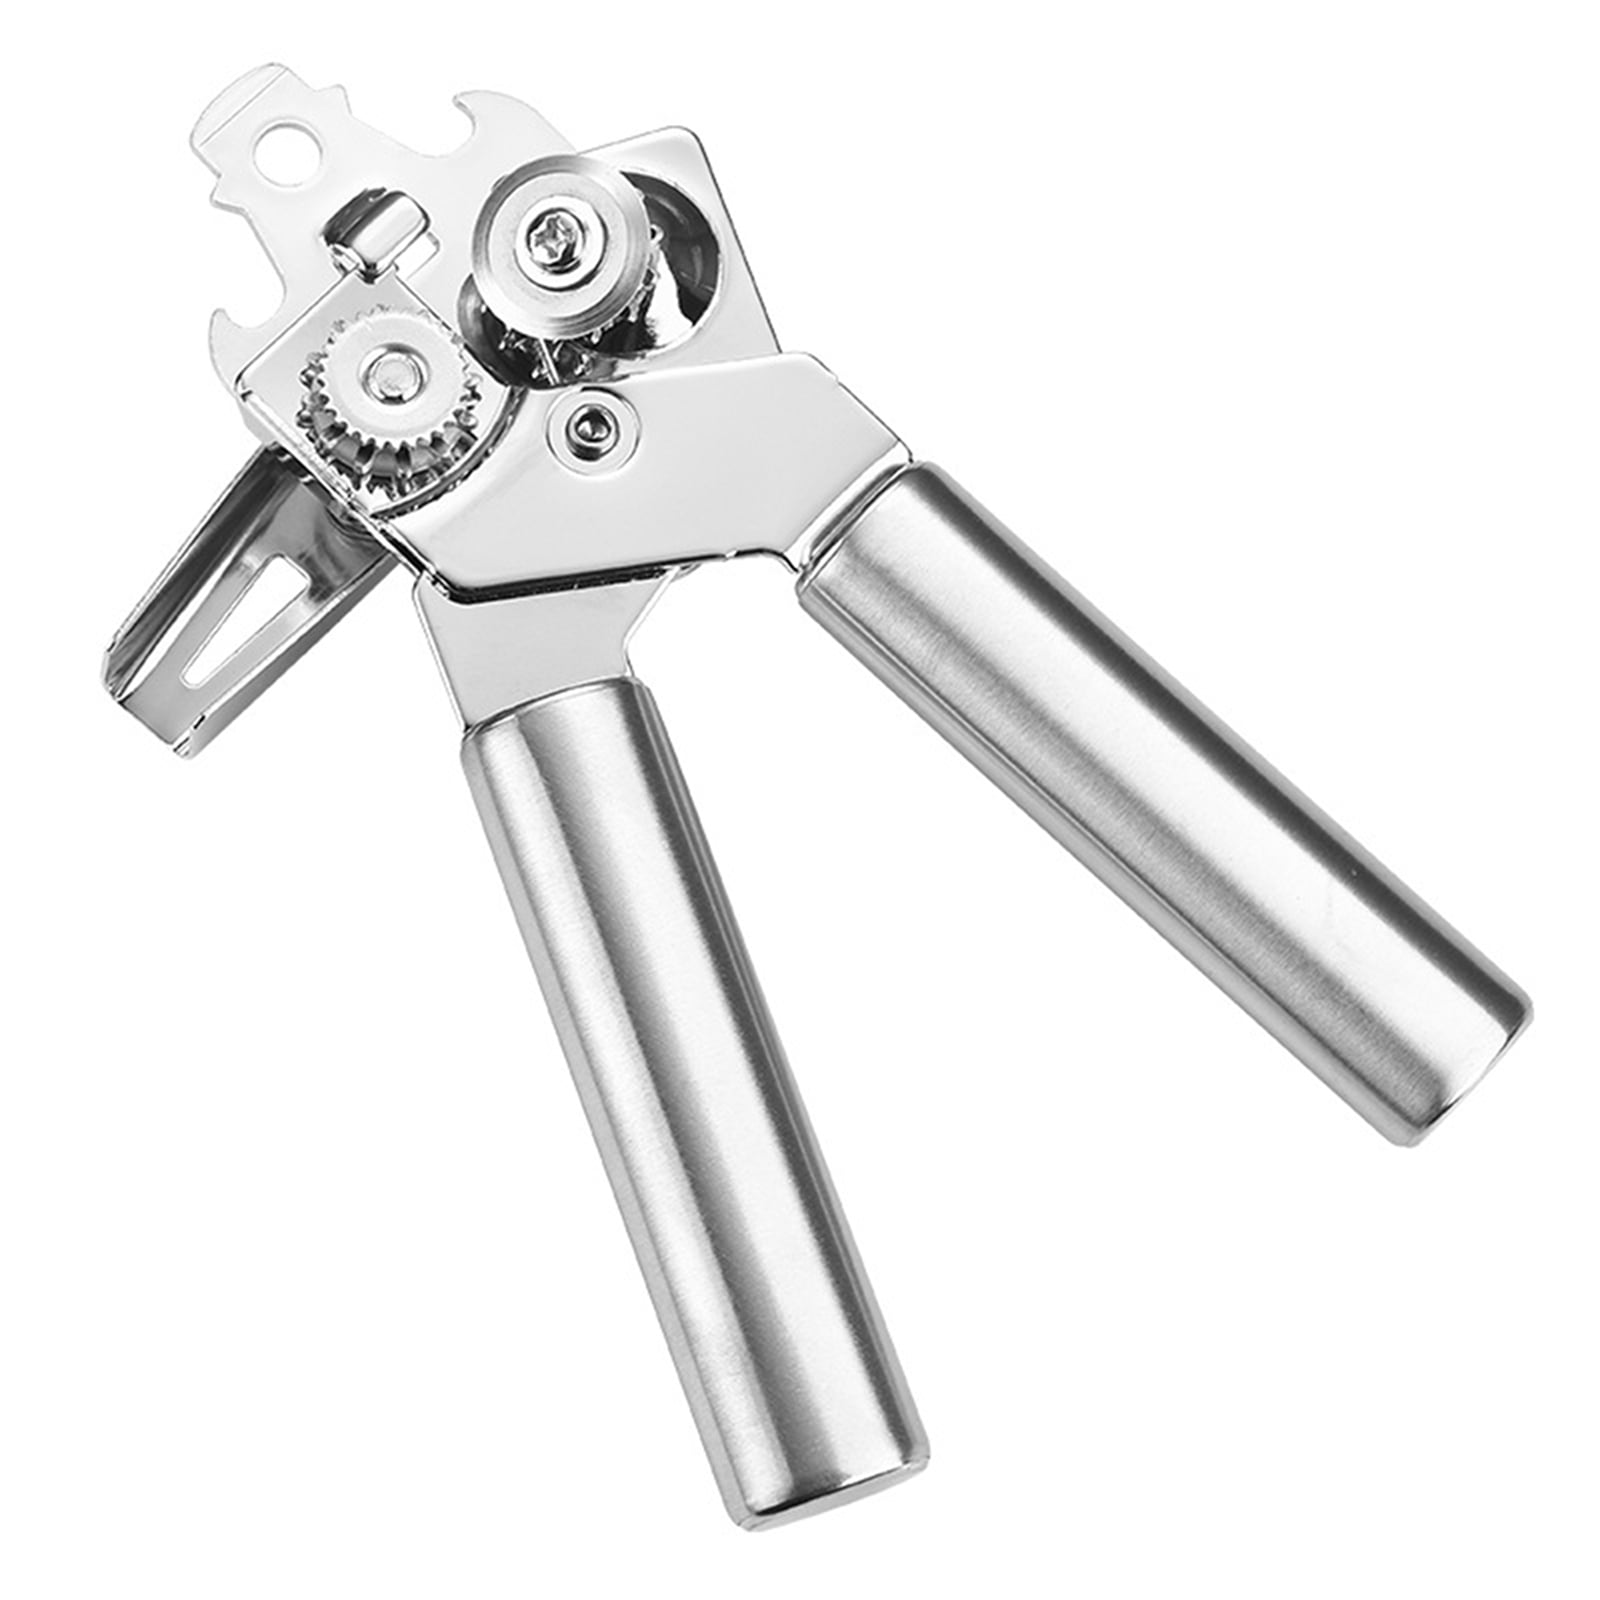 Details about    Great Can Opener Stainless Steel Gear Driven Legendary Reputation Cool Eazy to 